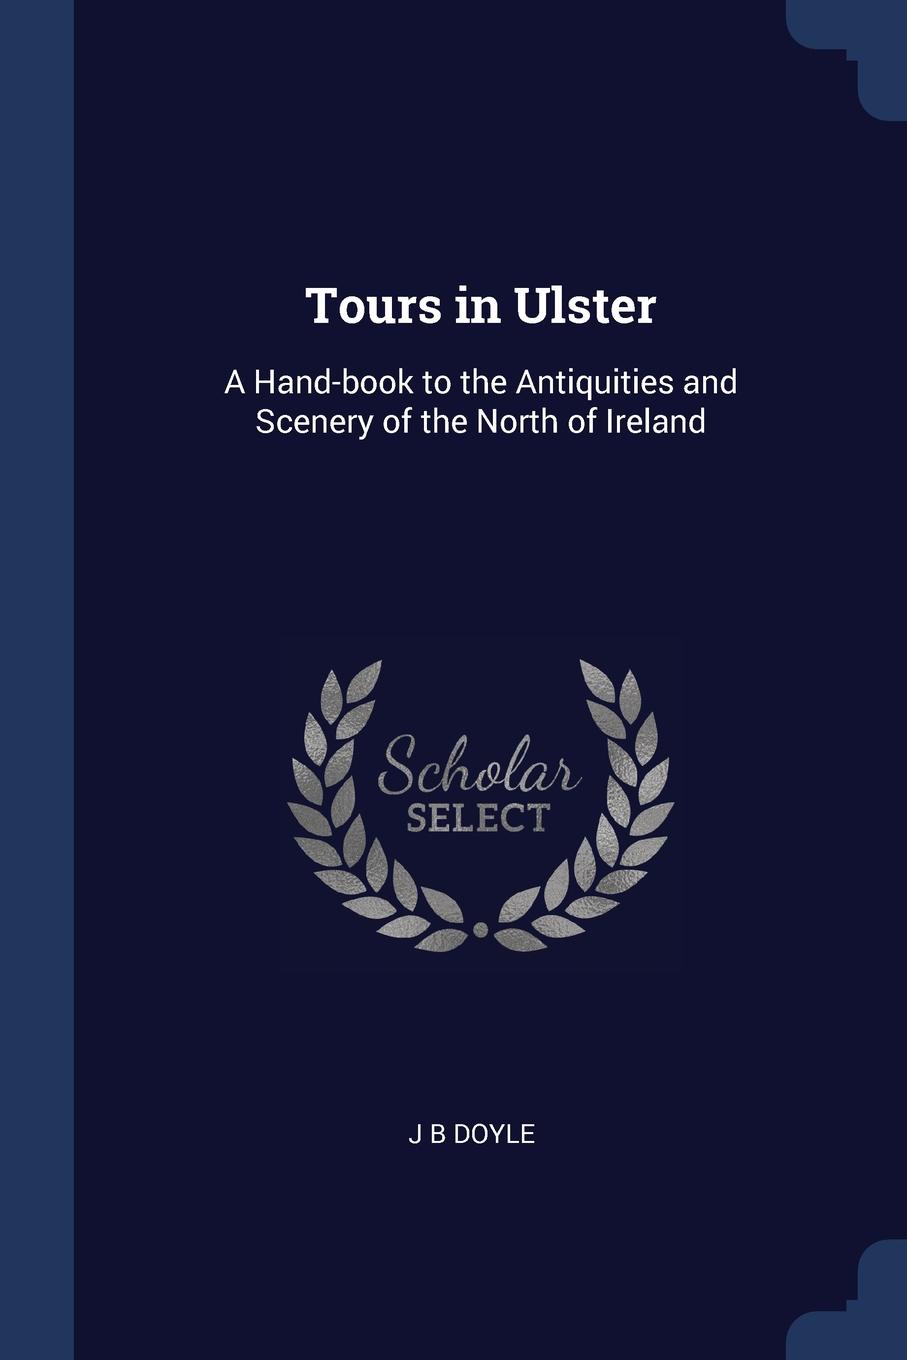 Tours in Ulster. A Hand-book to the Antiquities and Scenery of the North of Ireland